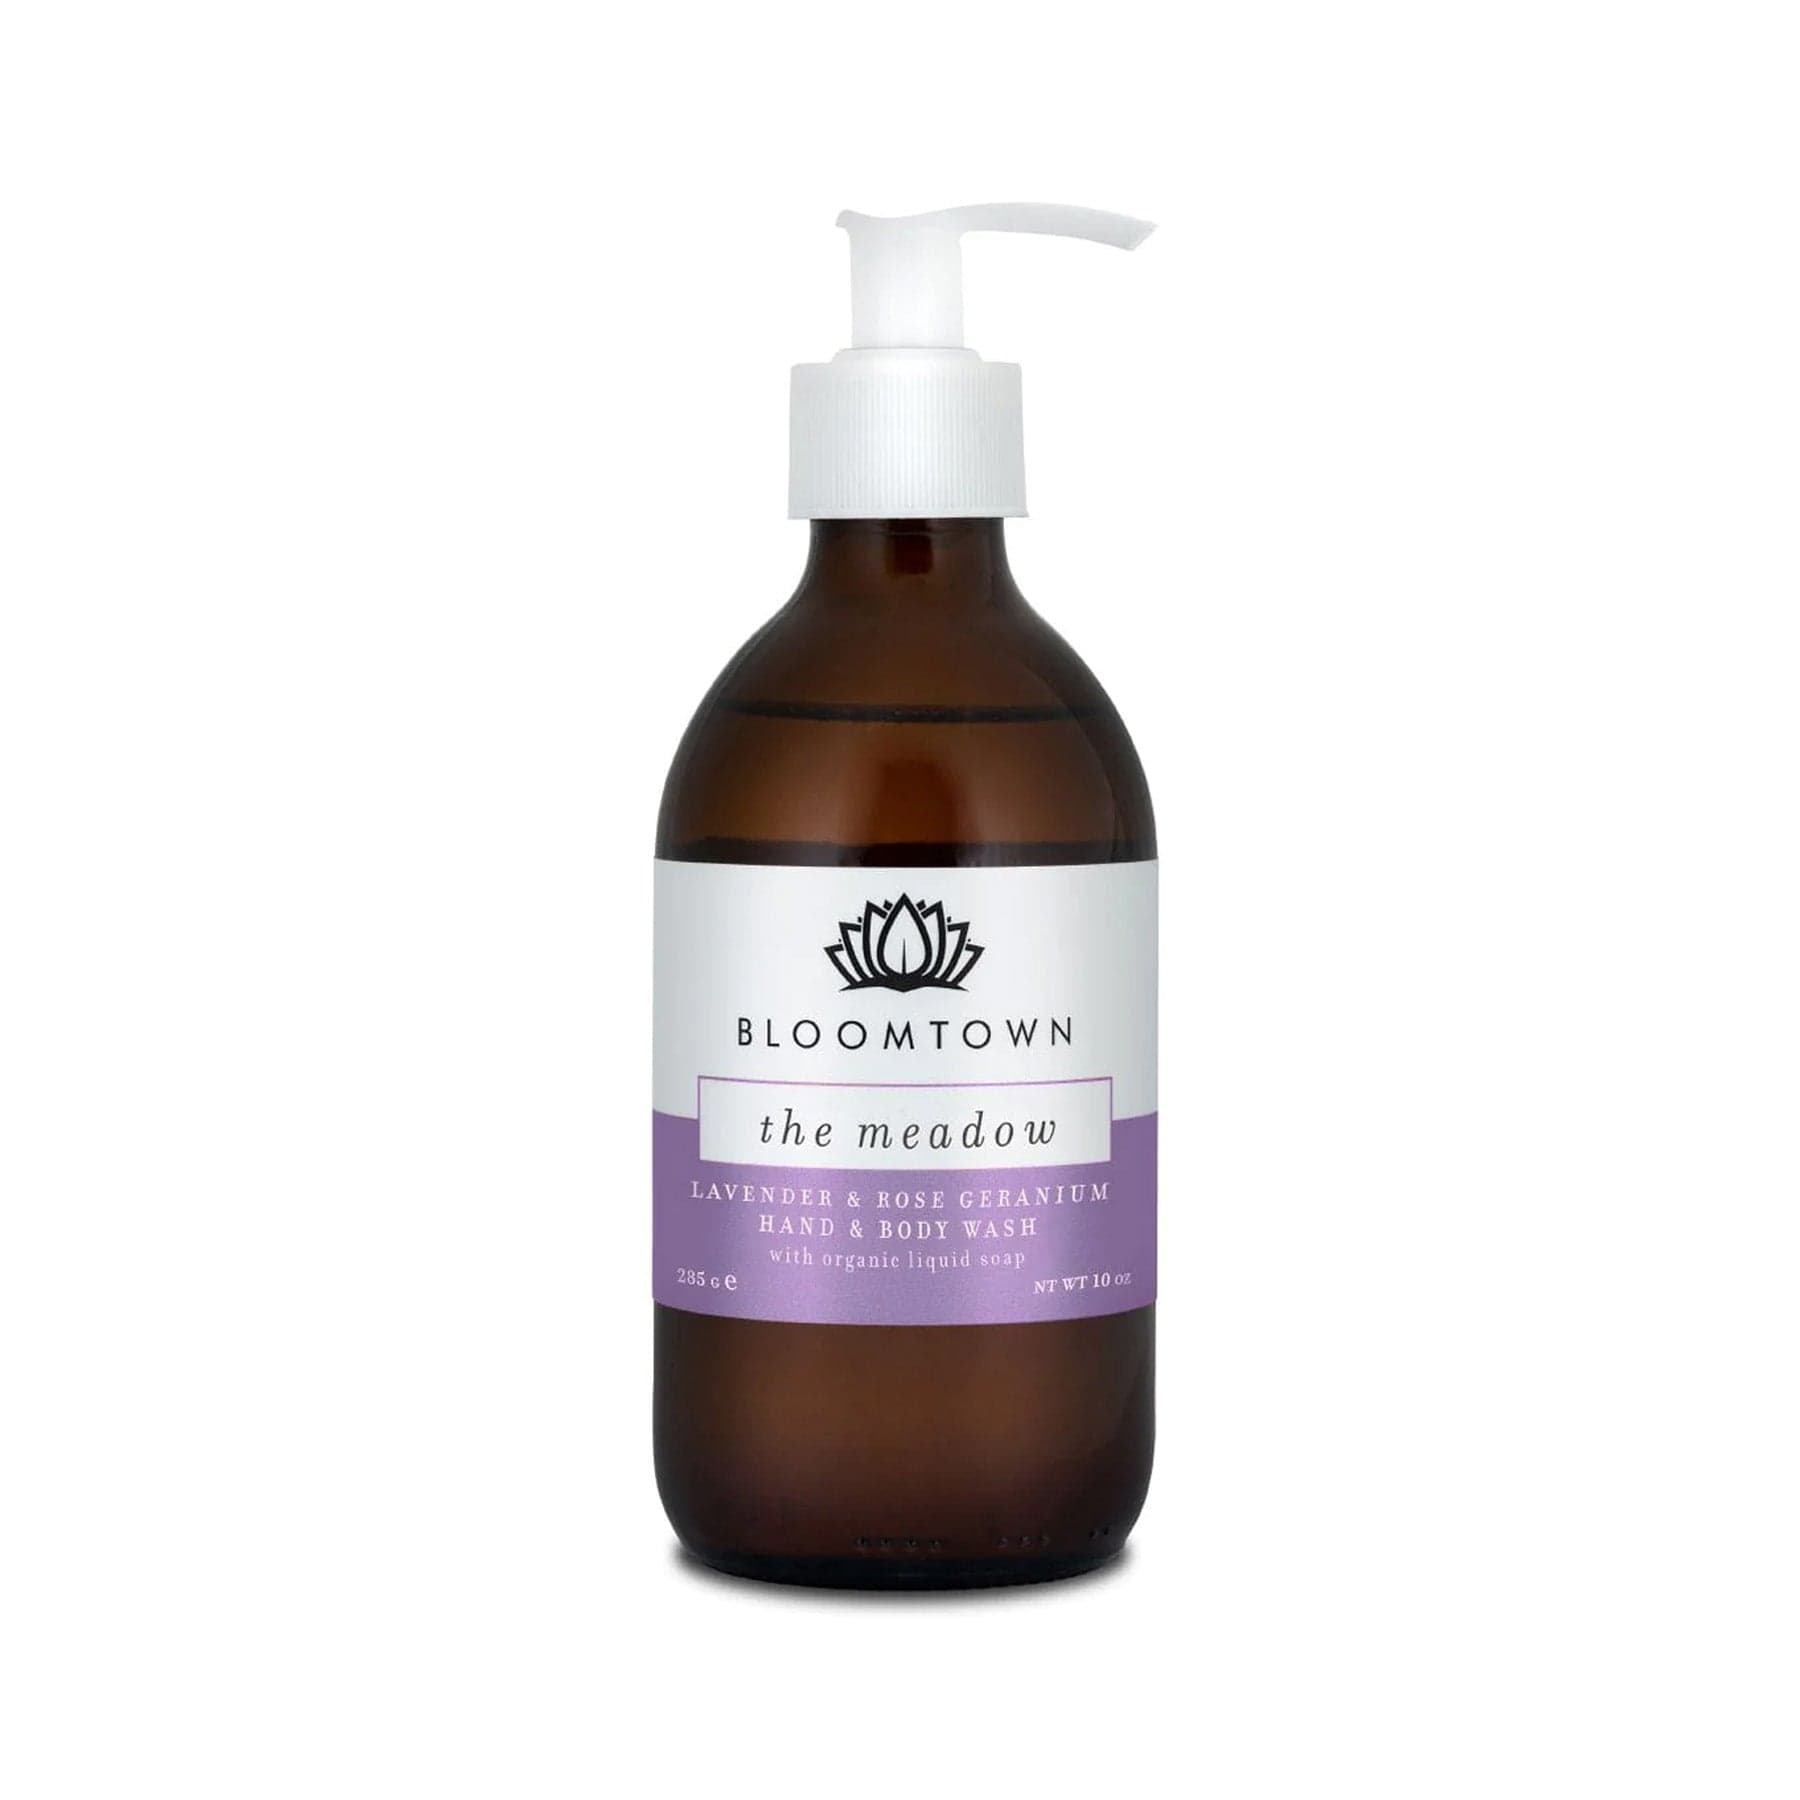 Bloomtown The Meadow lavender and rose geranium hand and body wash in amber bottle with white pump dispenser